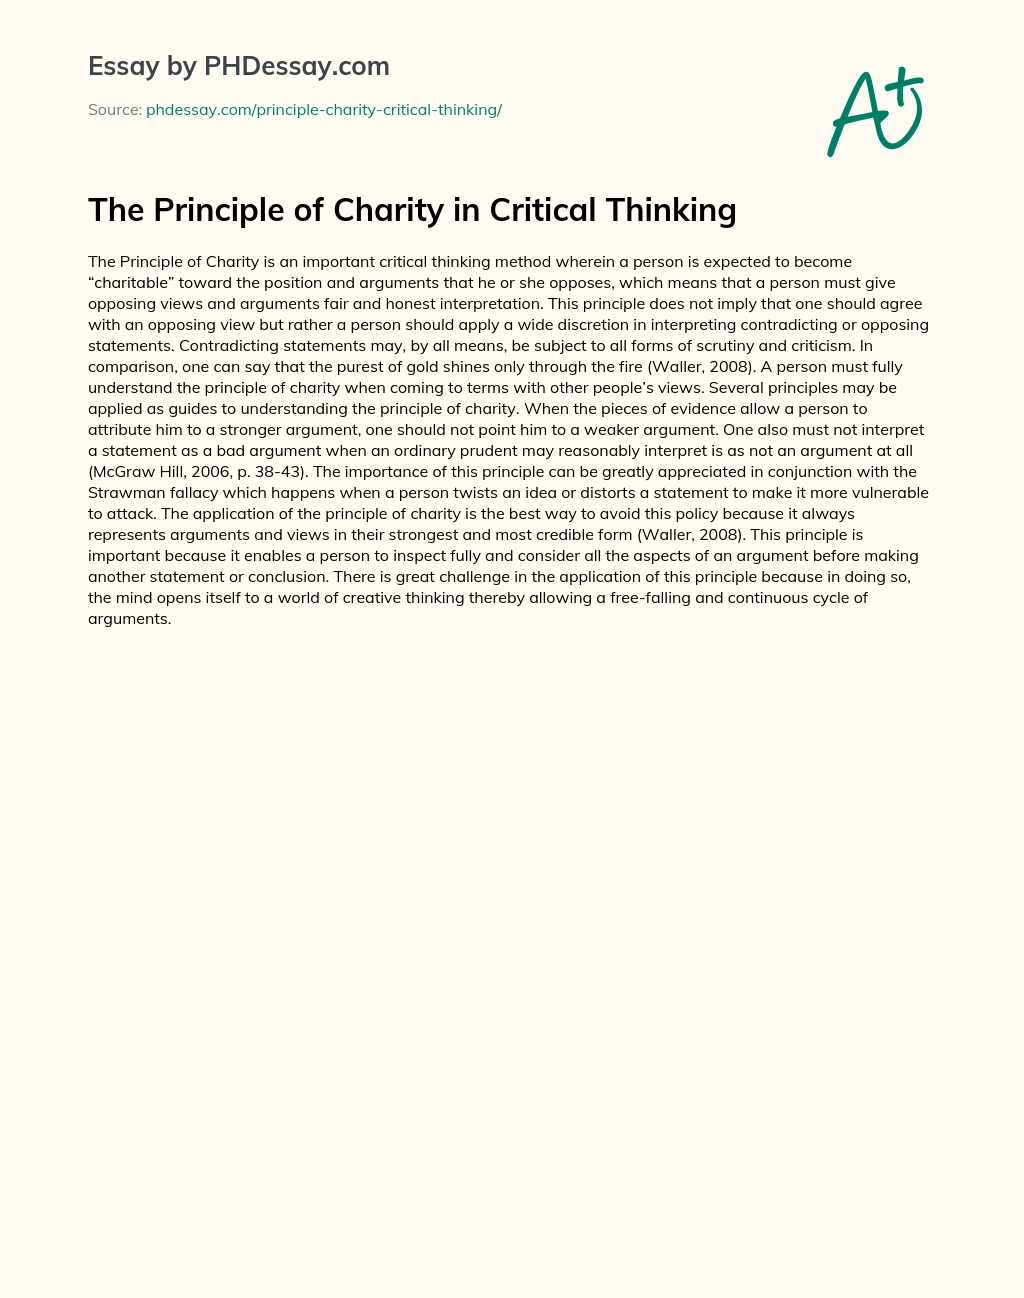 The Principle of Charity in Critical Thinking essay